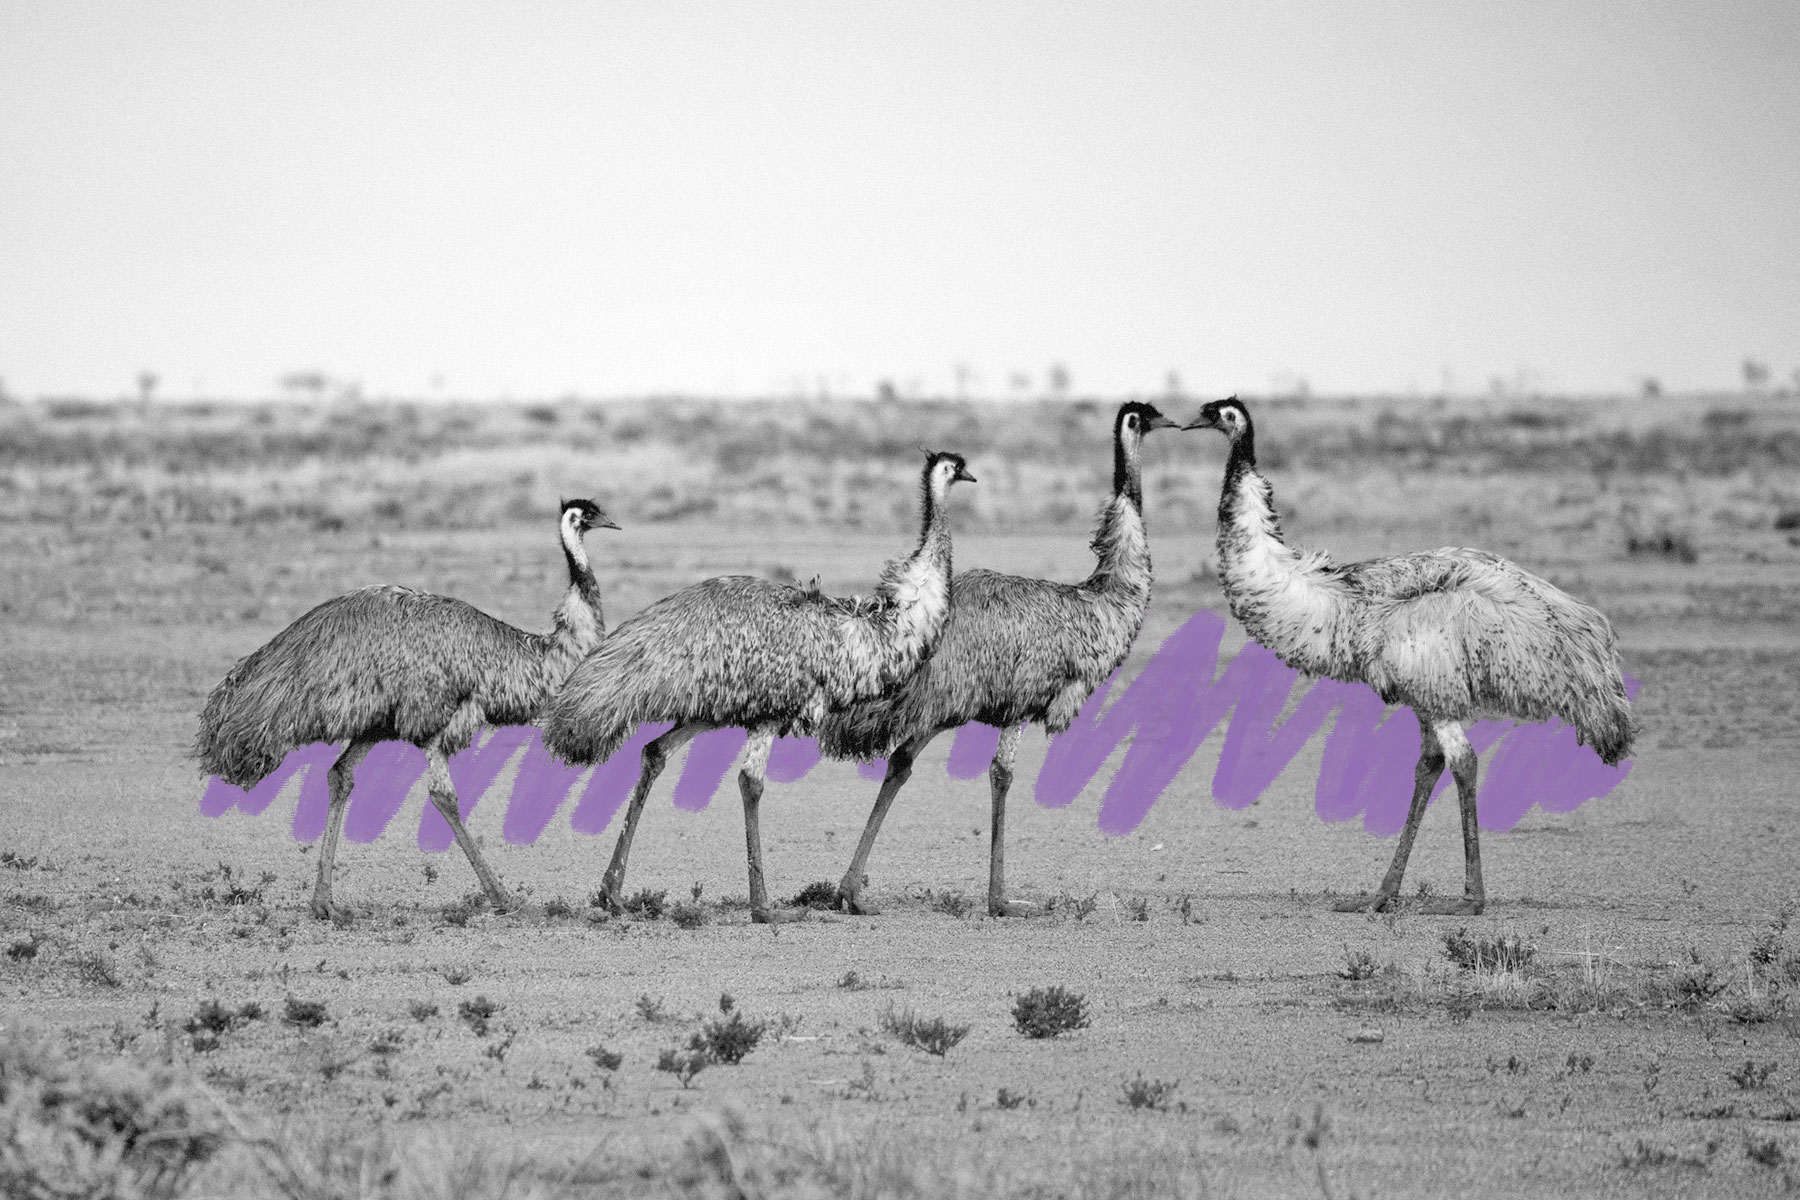 Wandering Outback emus